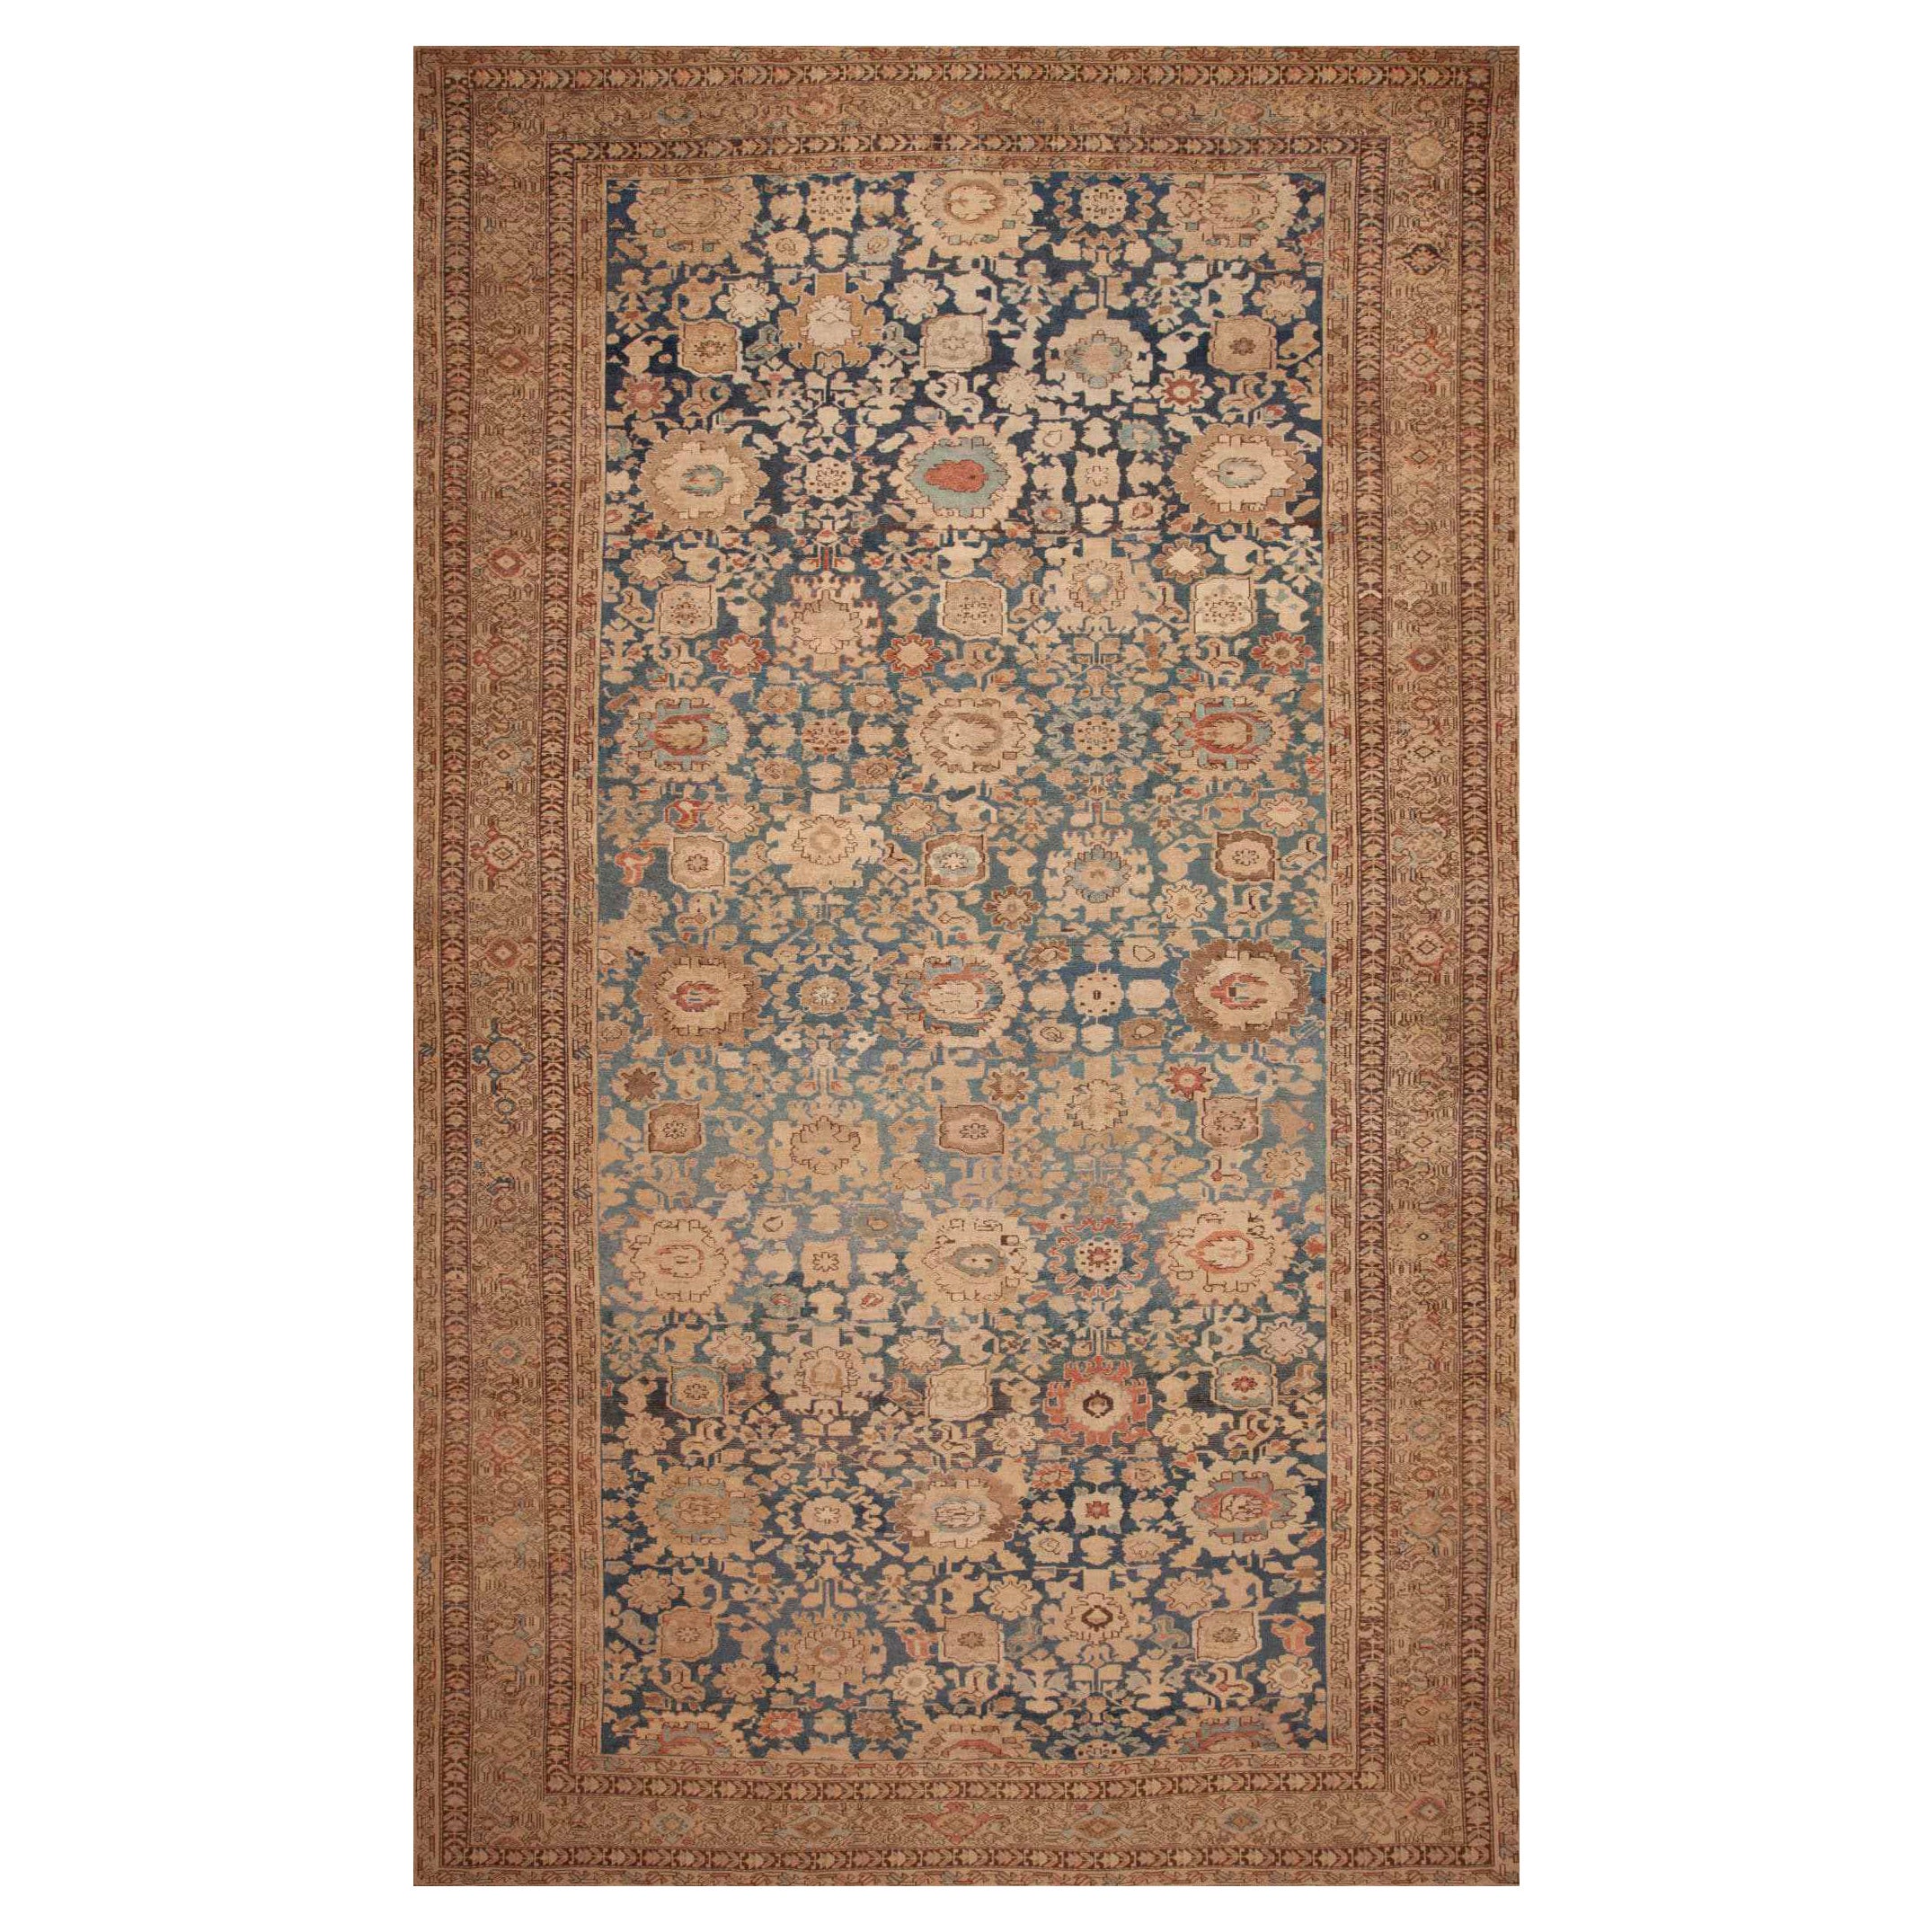 Decorative Large Size Light Blue Tribal Antique Persian Malayer Rug 11'6" x 19' For Sale